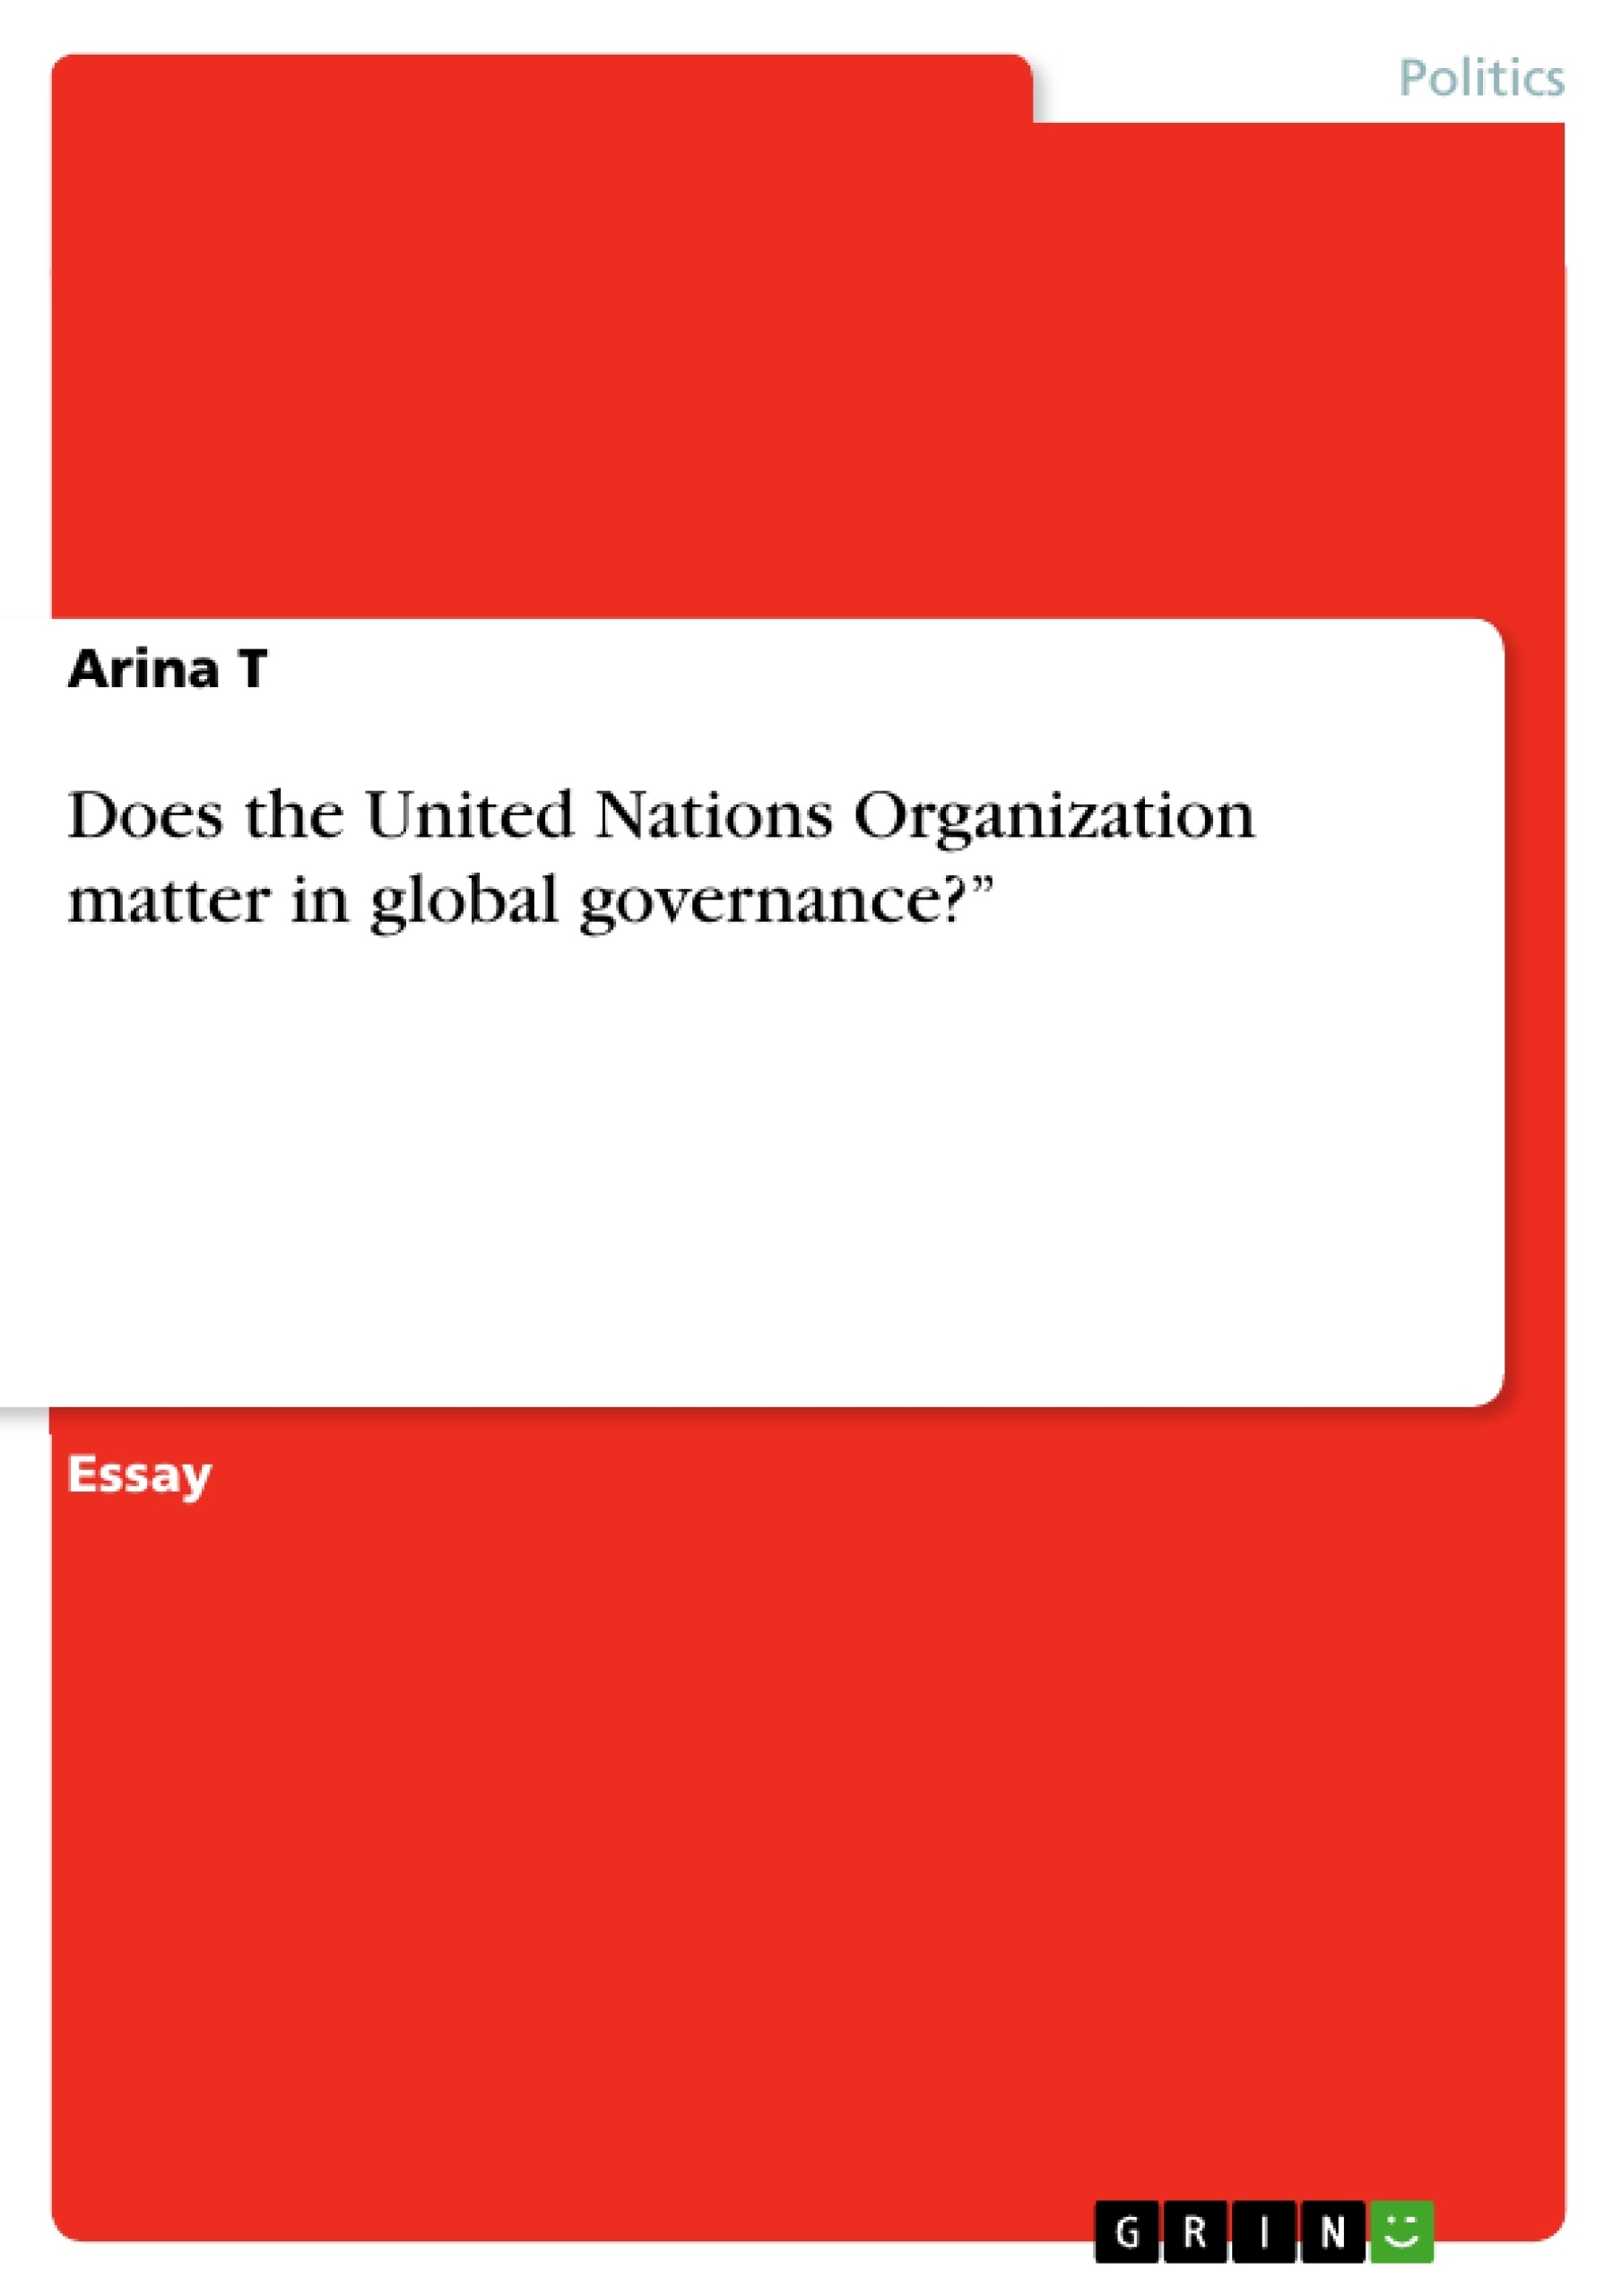 Title: Does the United Nations Organization matter in global governance?” 